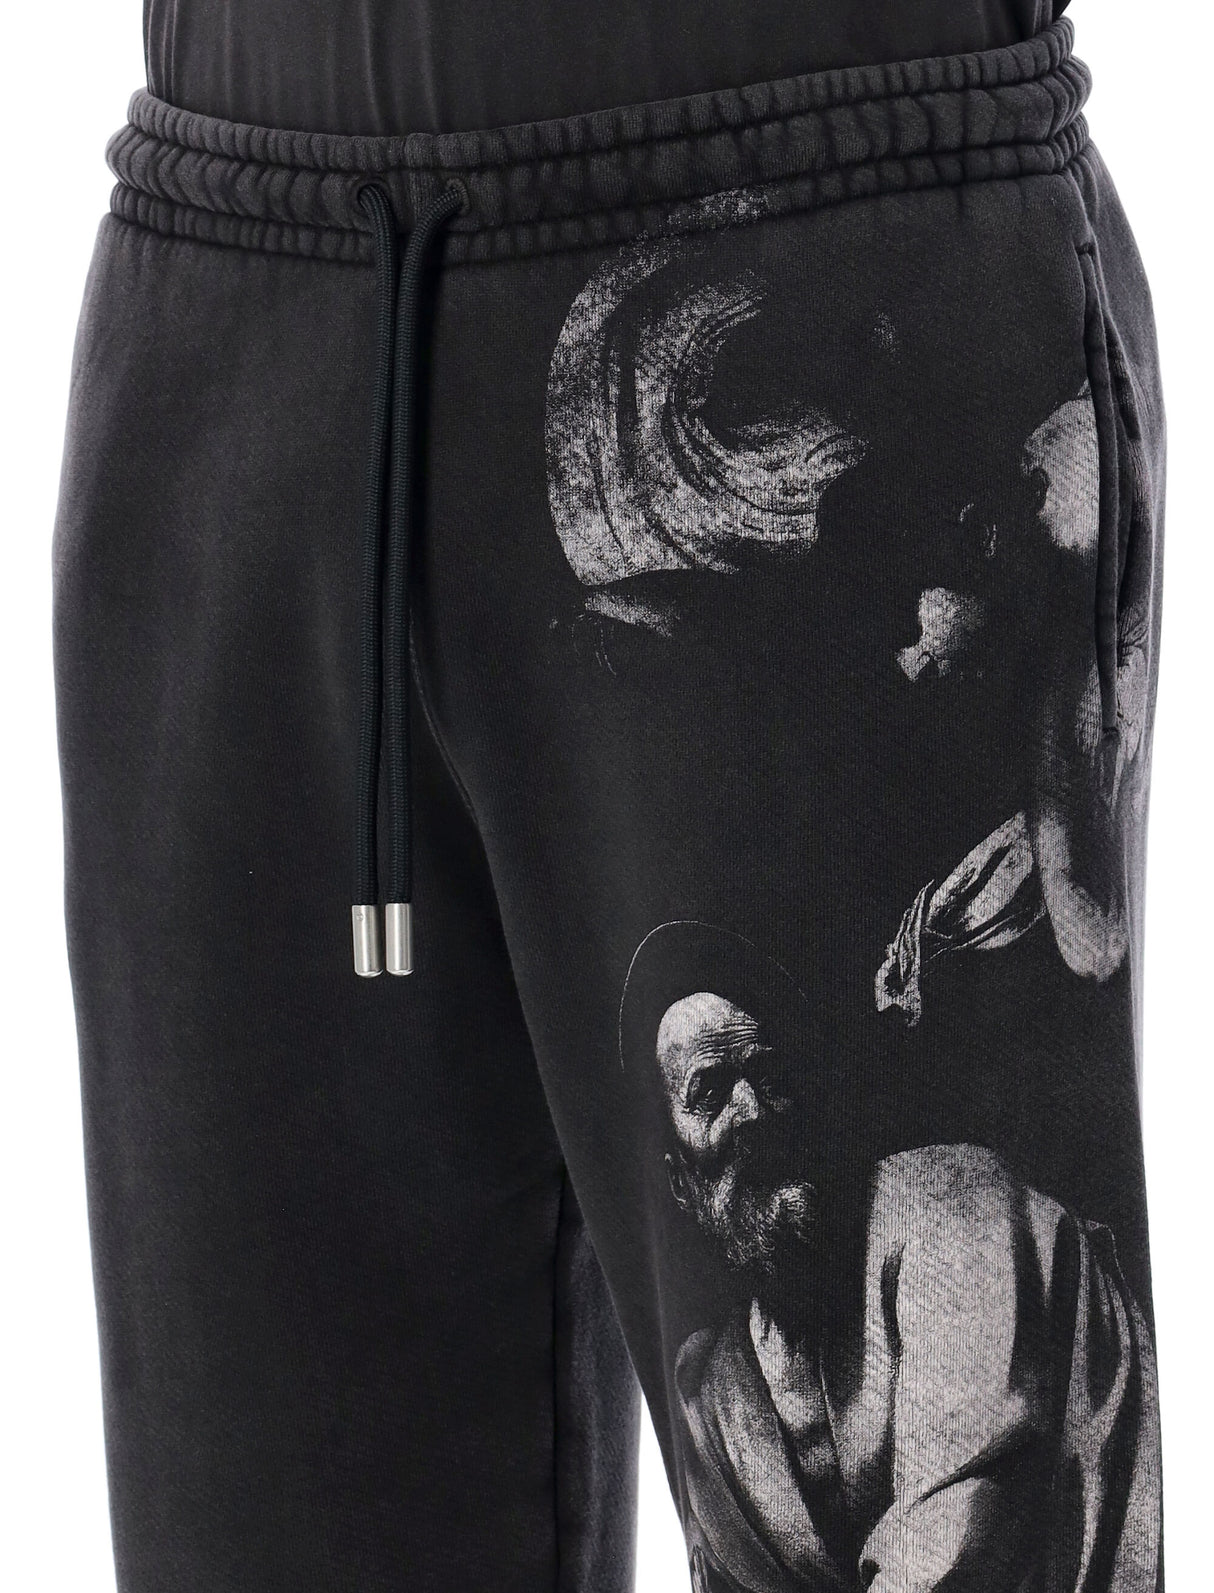 Men's S. Matthew Black Sweatpants - SS24 Collection by OFF-WHITE